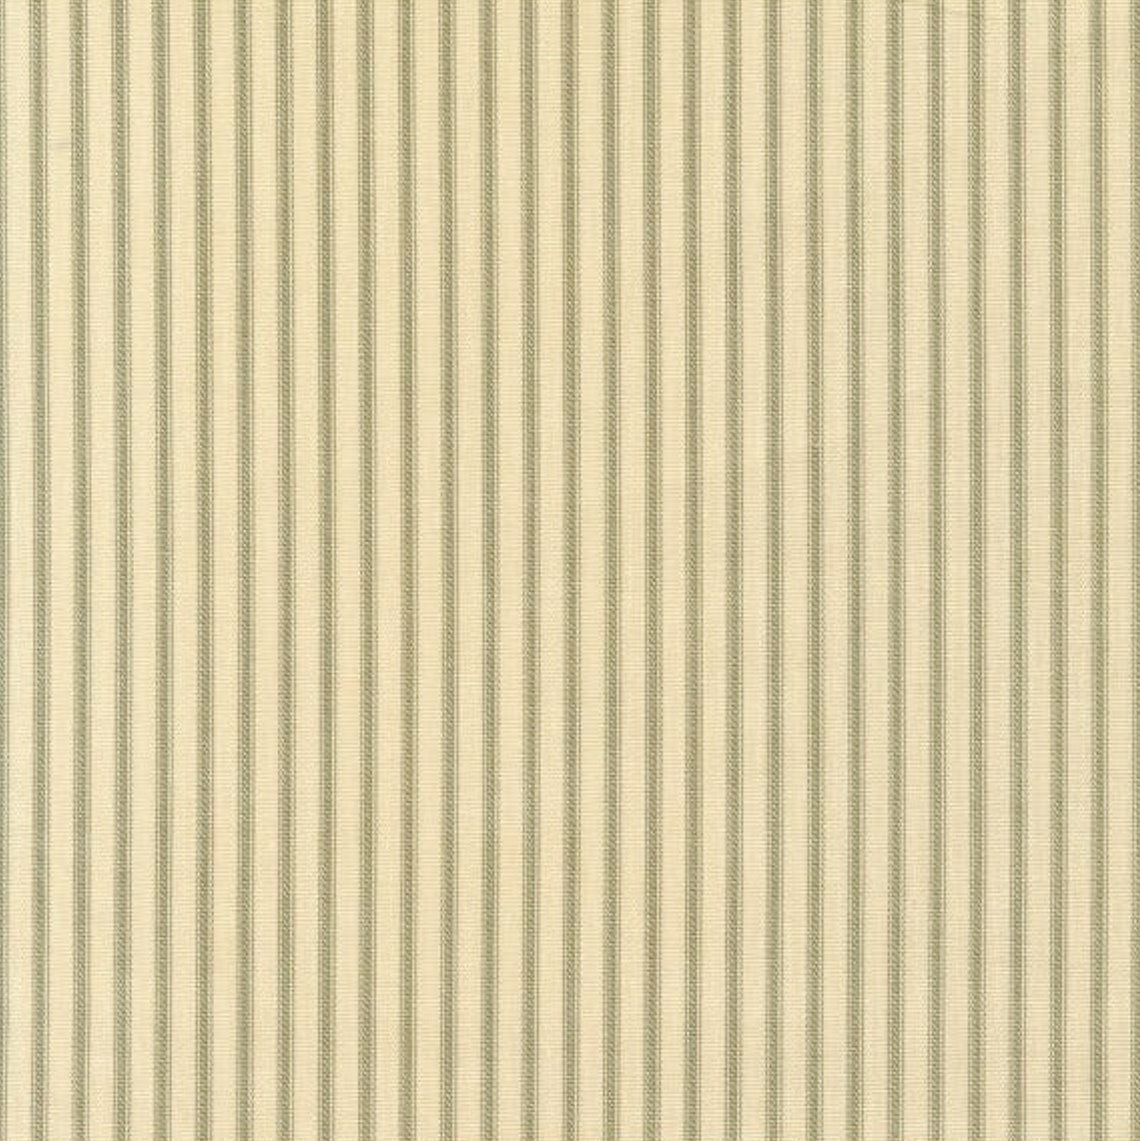 pinch pleated curtain panels pair in farmhouse pine green ticking stripe on beige